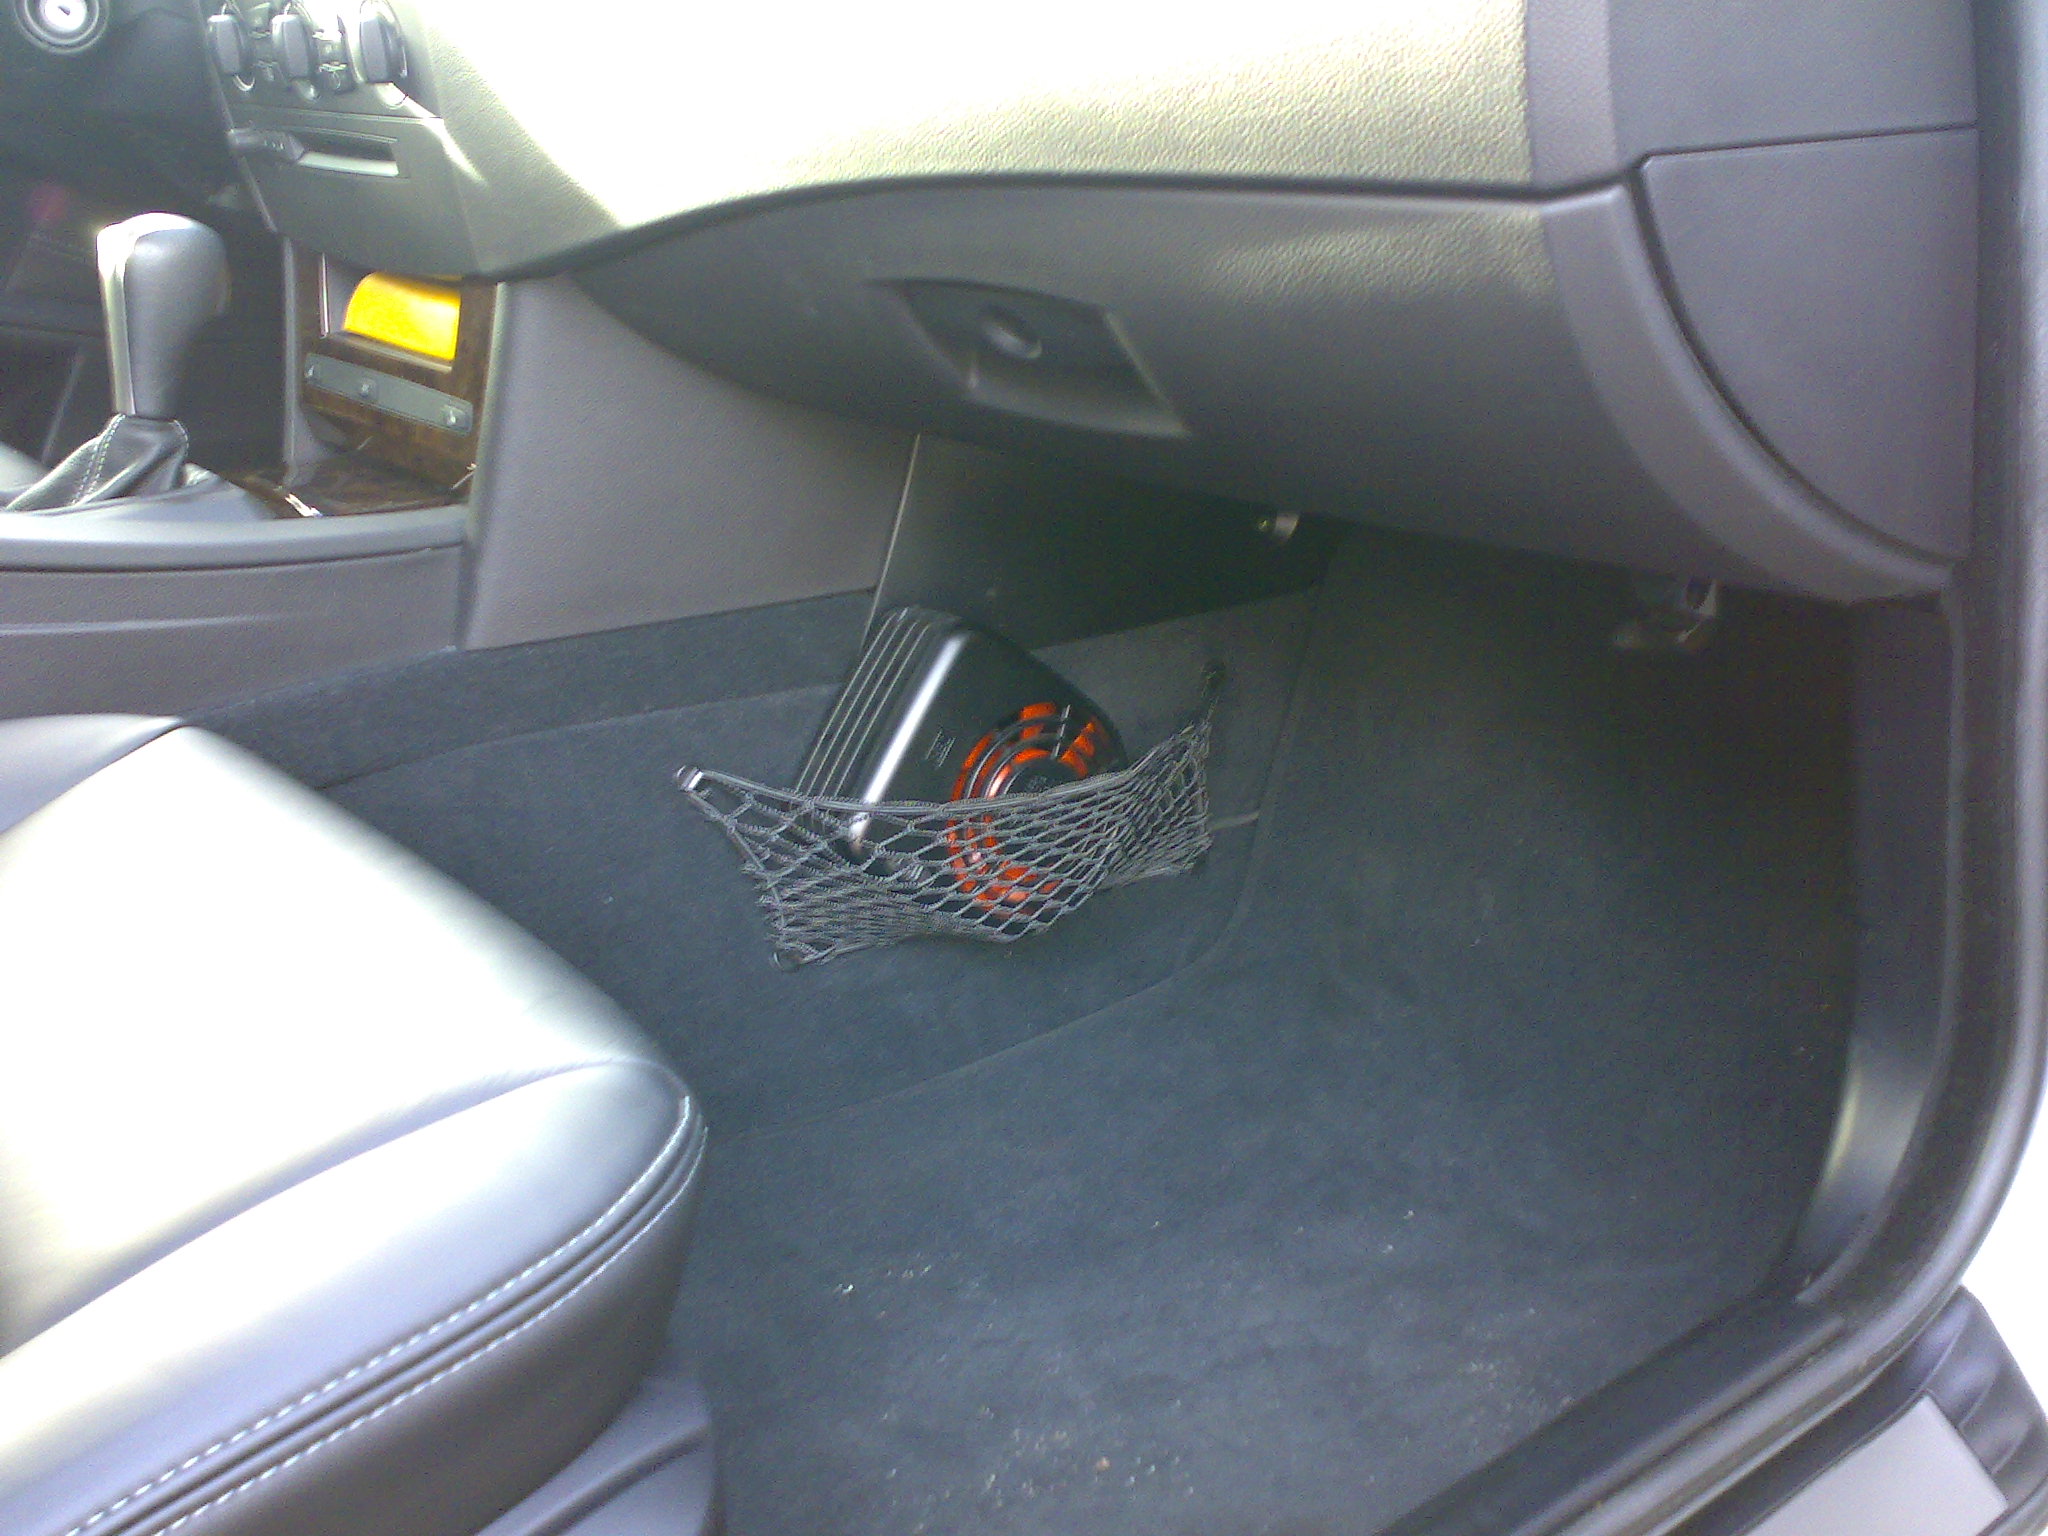 Ext car heating system -  - Forums